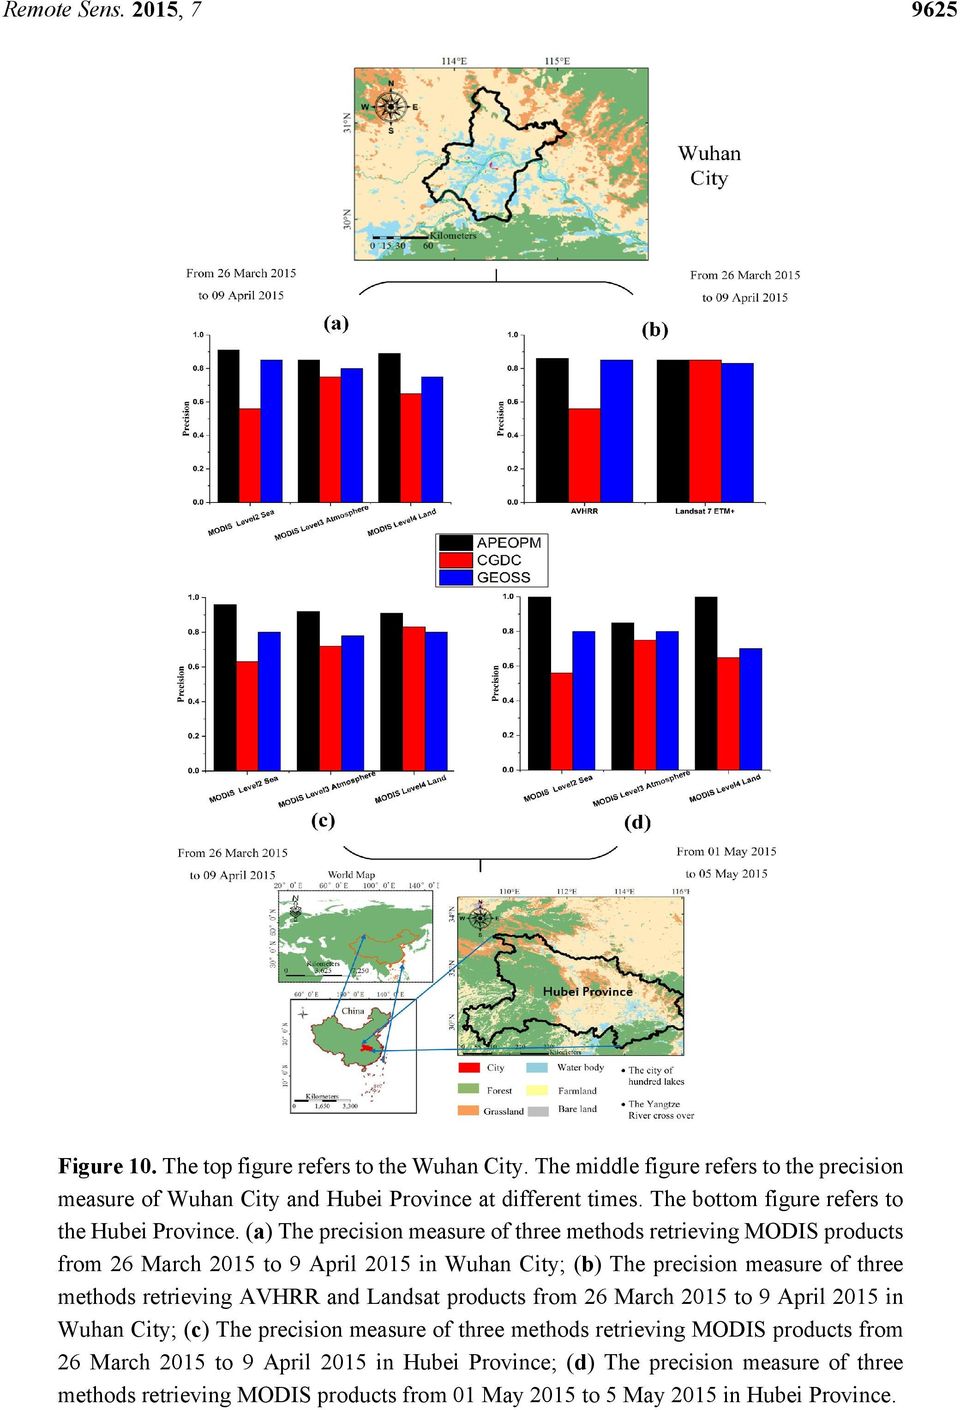 (a) The precision measure of three methods retrieving MODIS products from 26 March 2015 to 9 April 2015 in Wuhan City; (b) The precision measure of three methods retrieving AVHRR